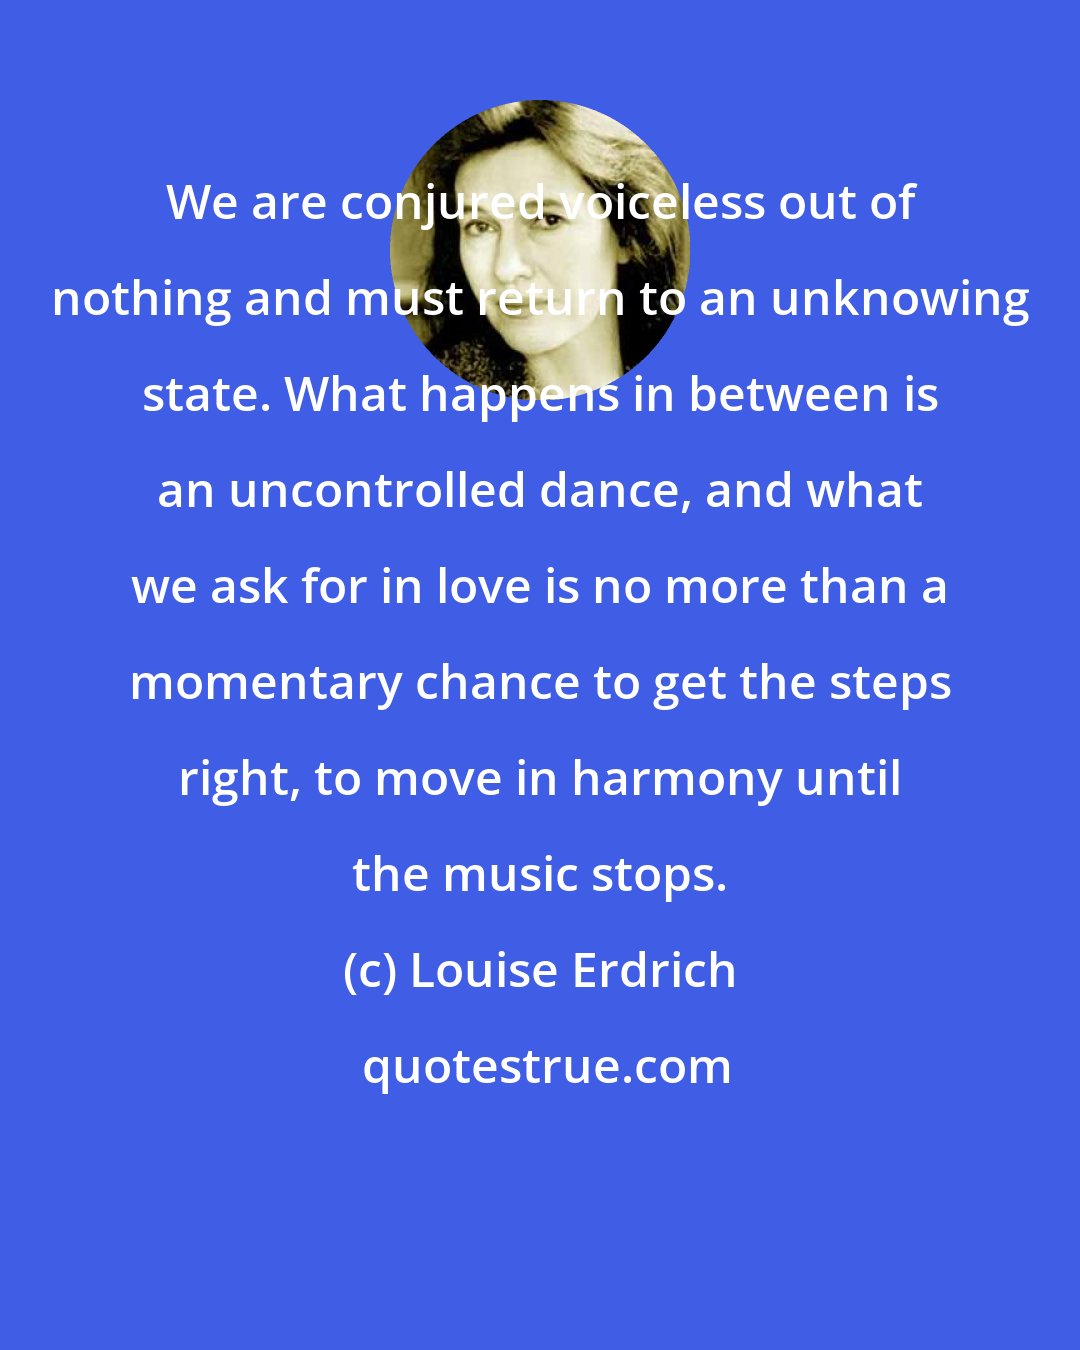 Louise Erdrich: We are conjured voiceless out of nothing and must return to an unknowing state. What happens in between is an uncontrolled dance, and what we ask for in love is no more than a momentary chance to get the steps right, to move in harmony until the music stops.